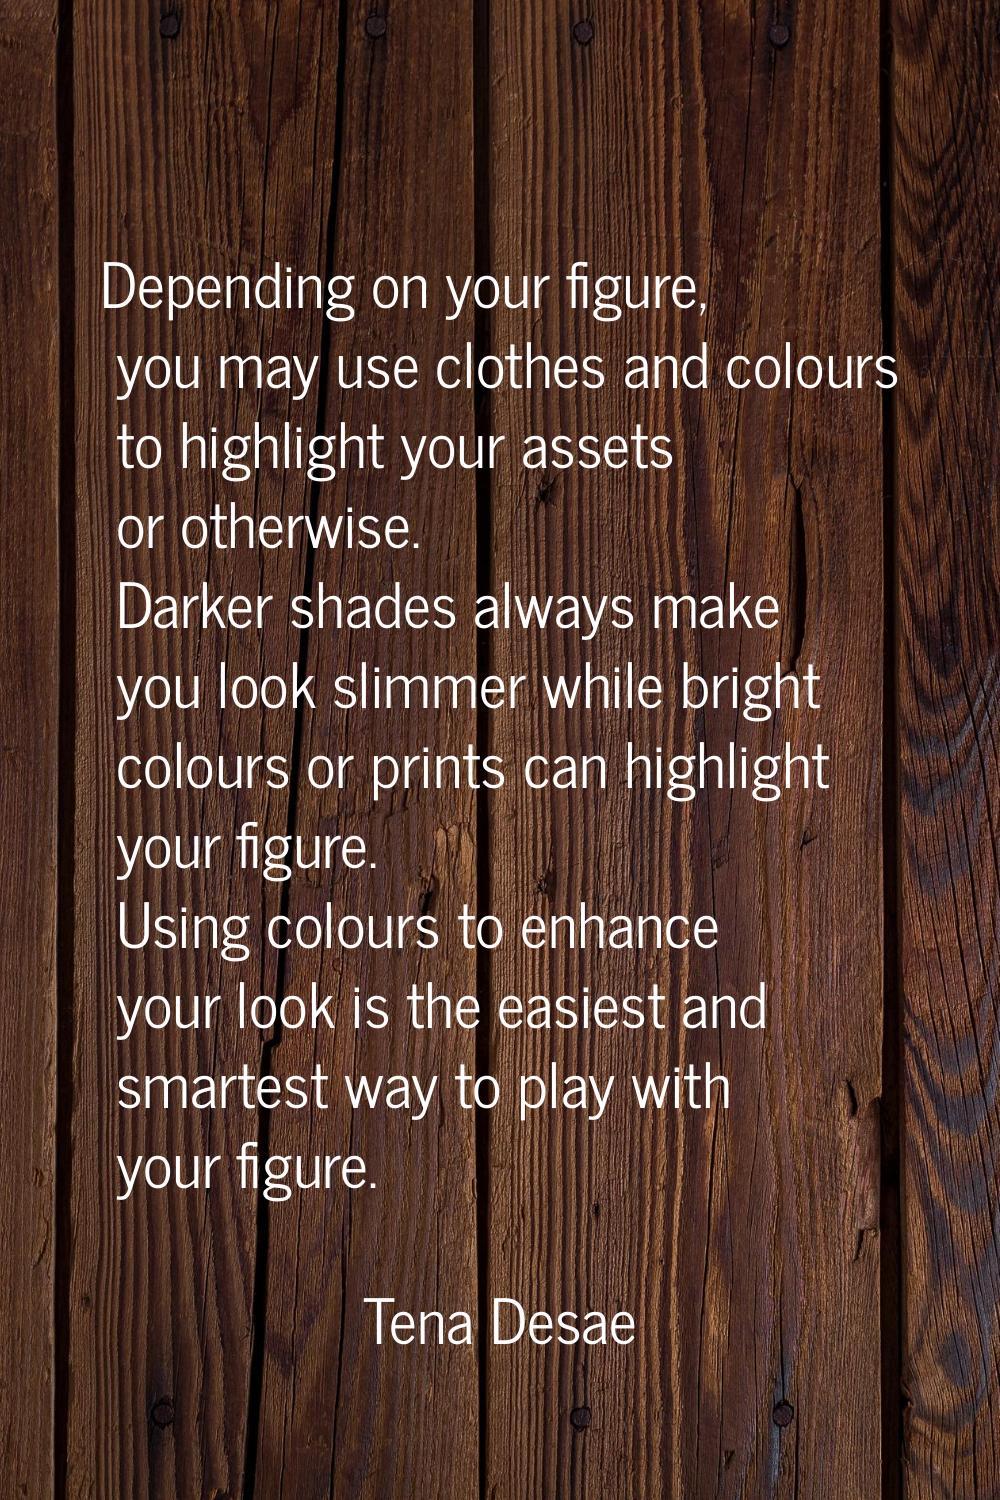 Depending on your figure, you may use clothes and colours to highlight your assets or otherwise. Da